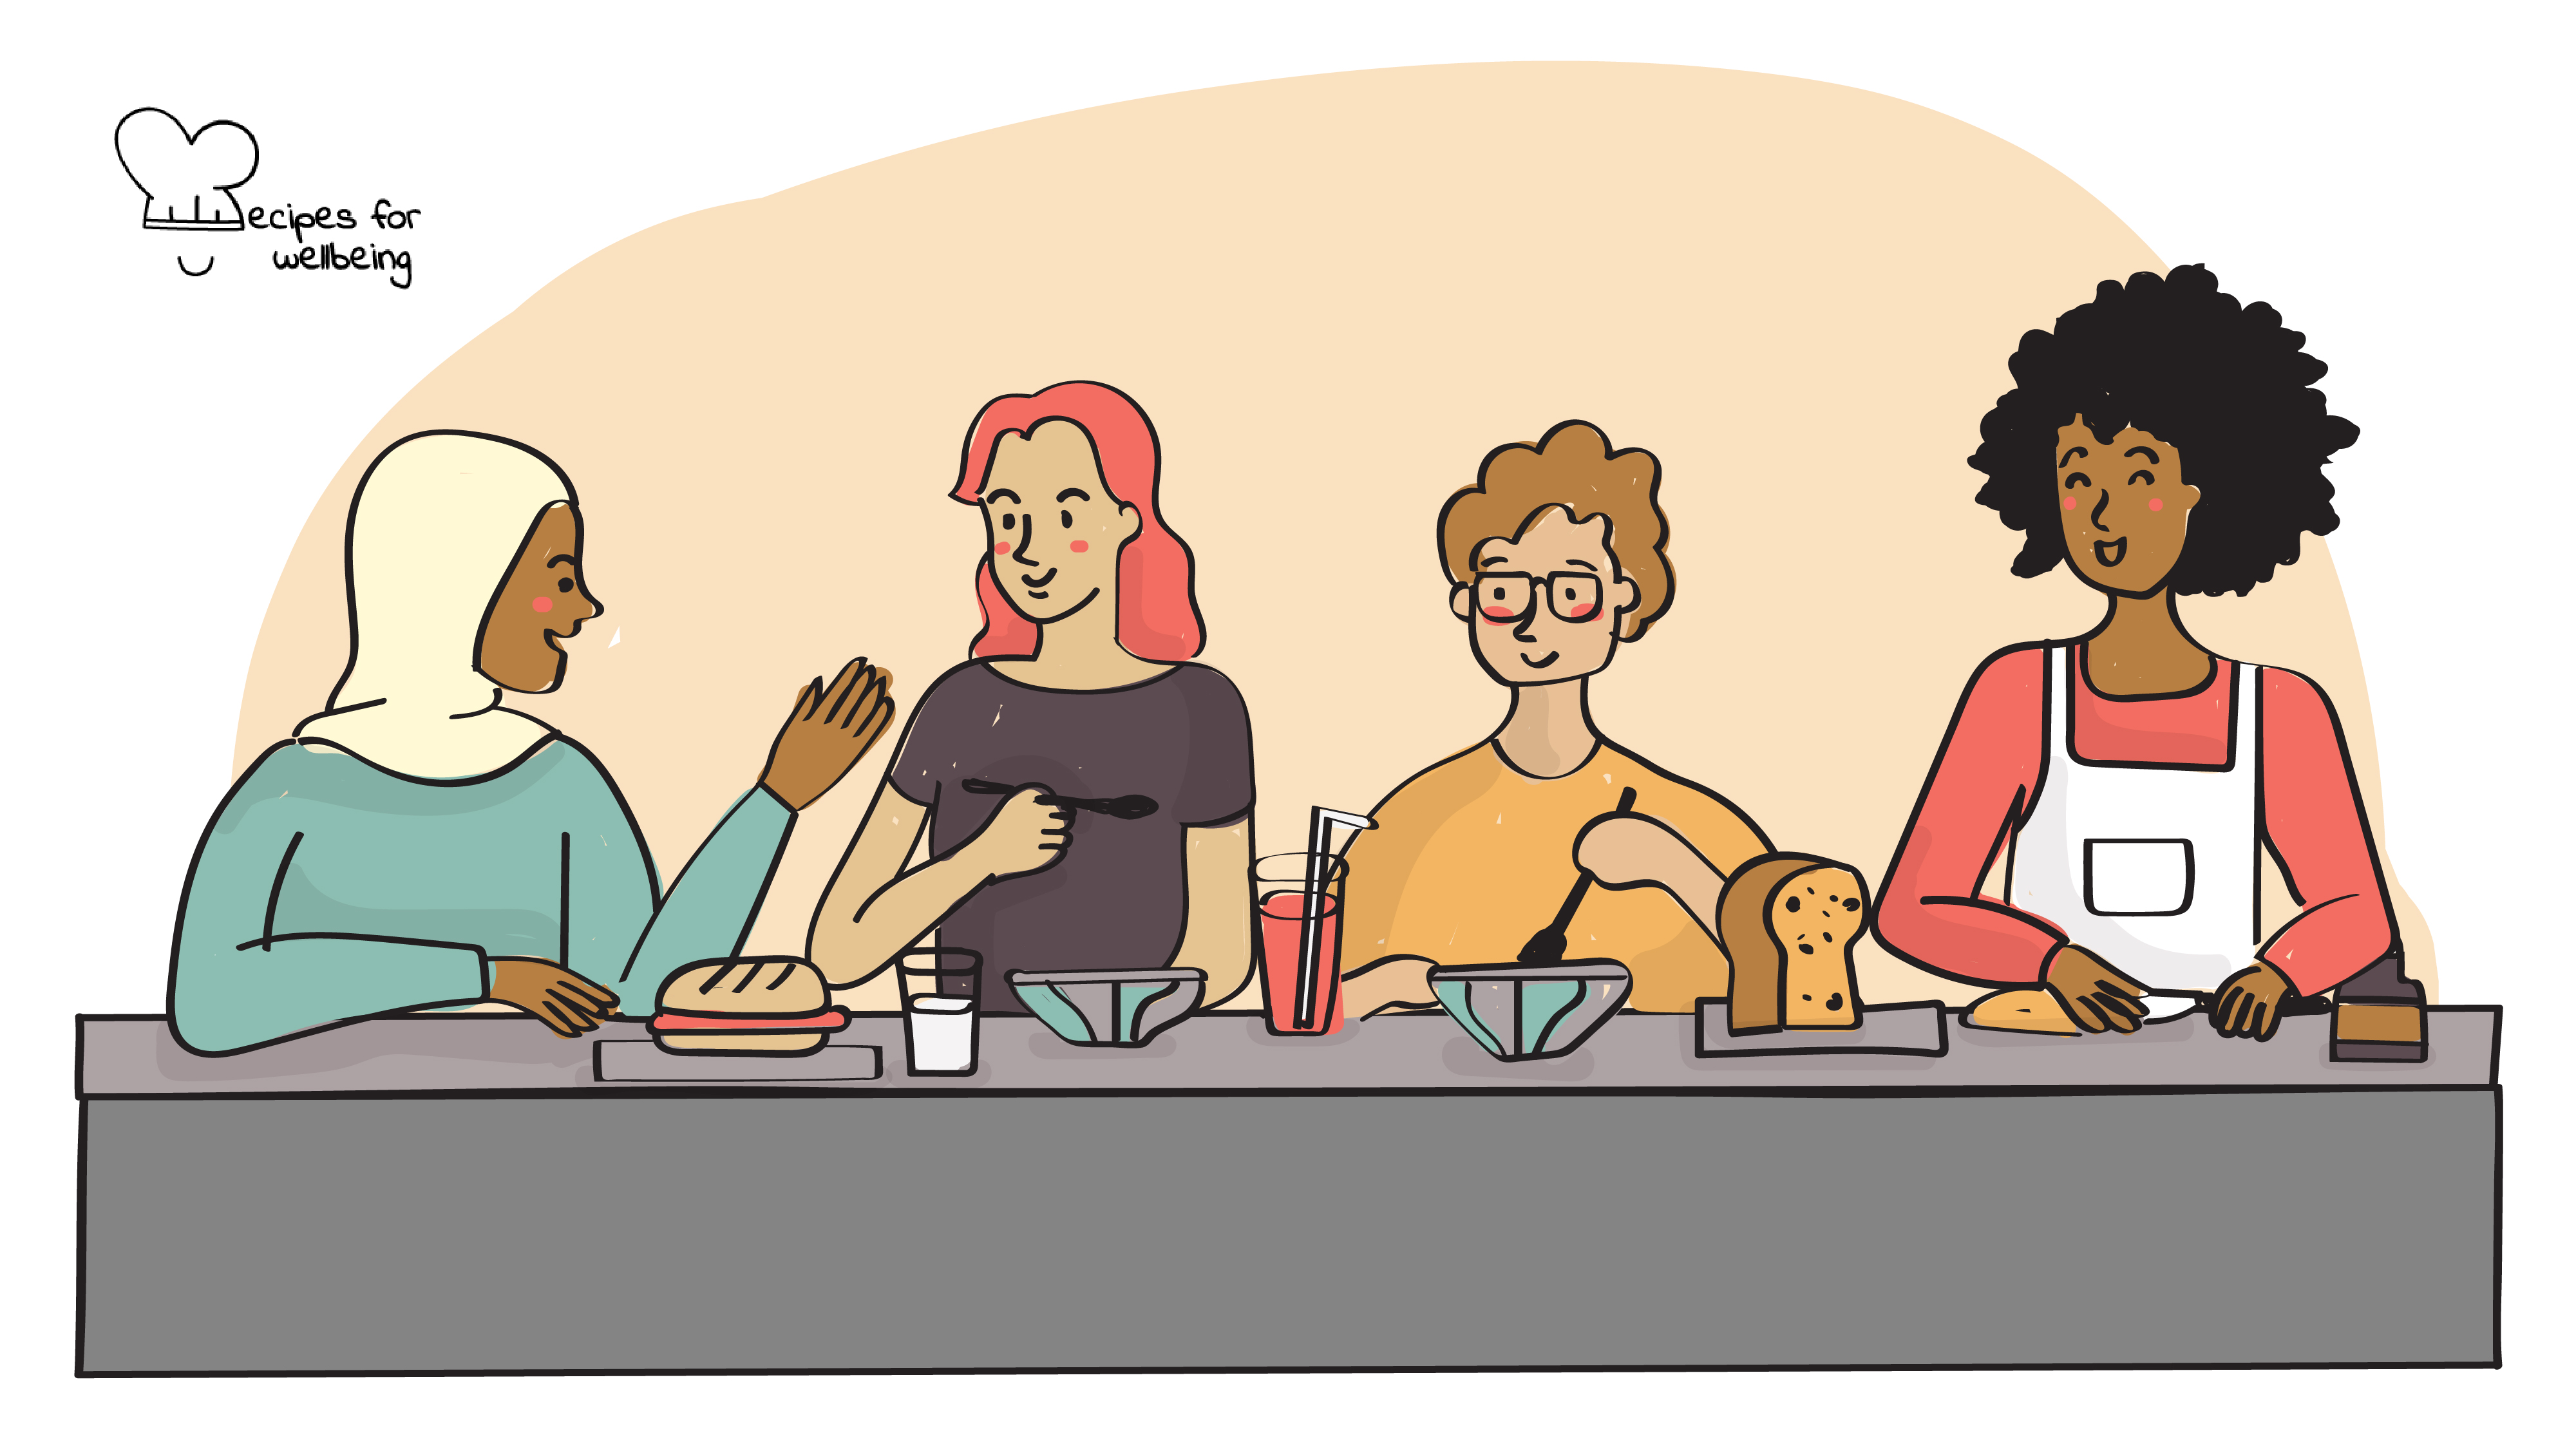 Illustration of 4 people talking to each other over a shared meal. © Recipes for Wellbeing